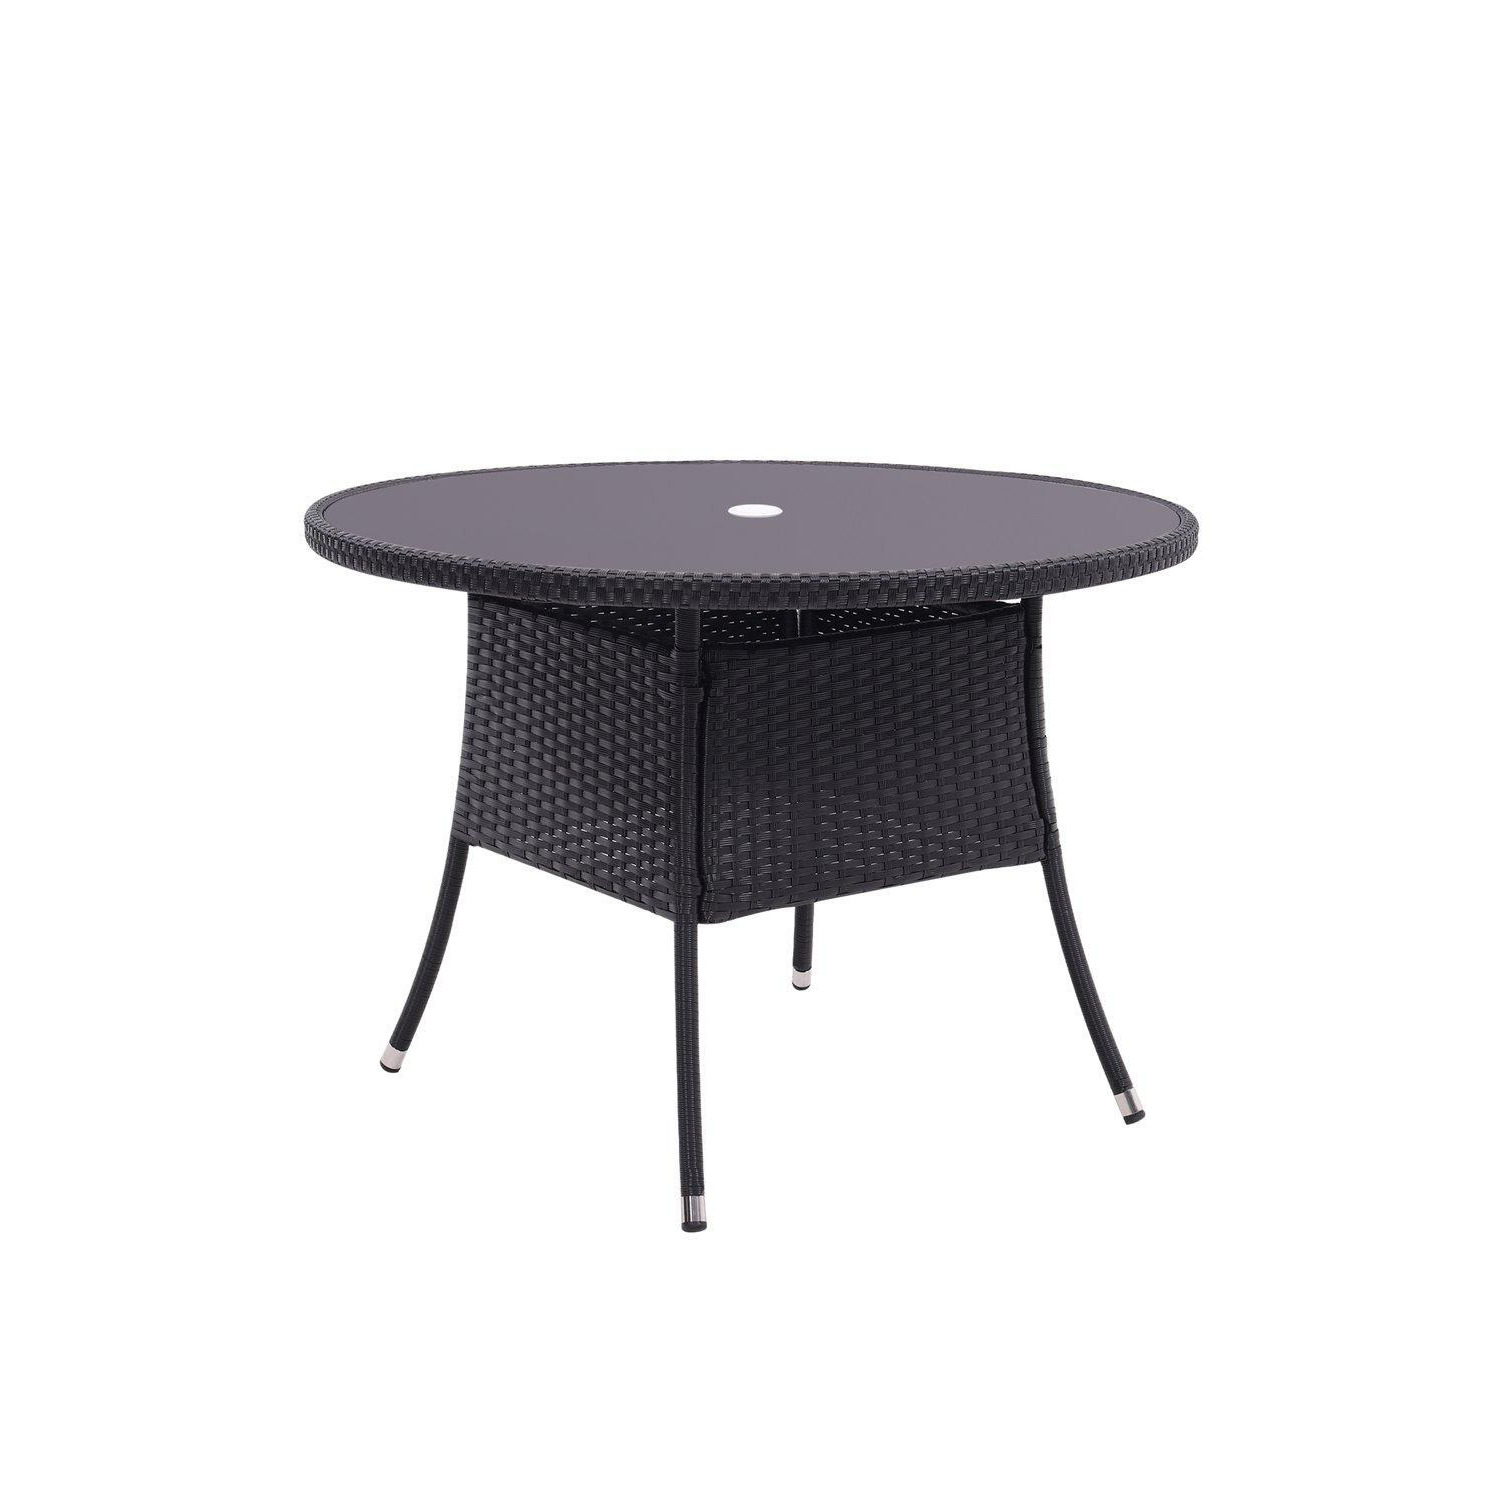 Round Wicker Garden Dining Table With Parasol Hole - image 1